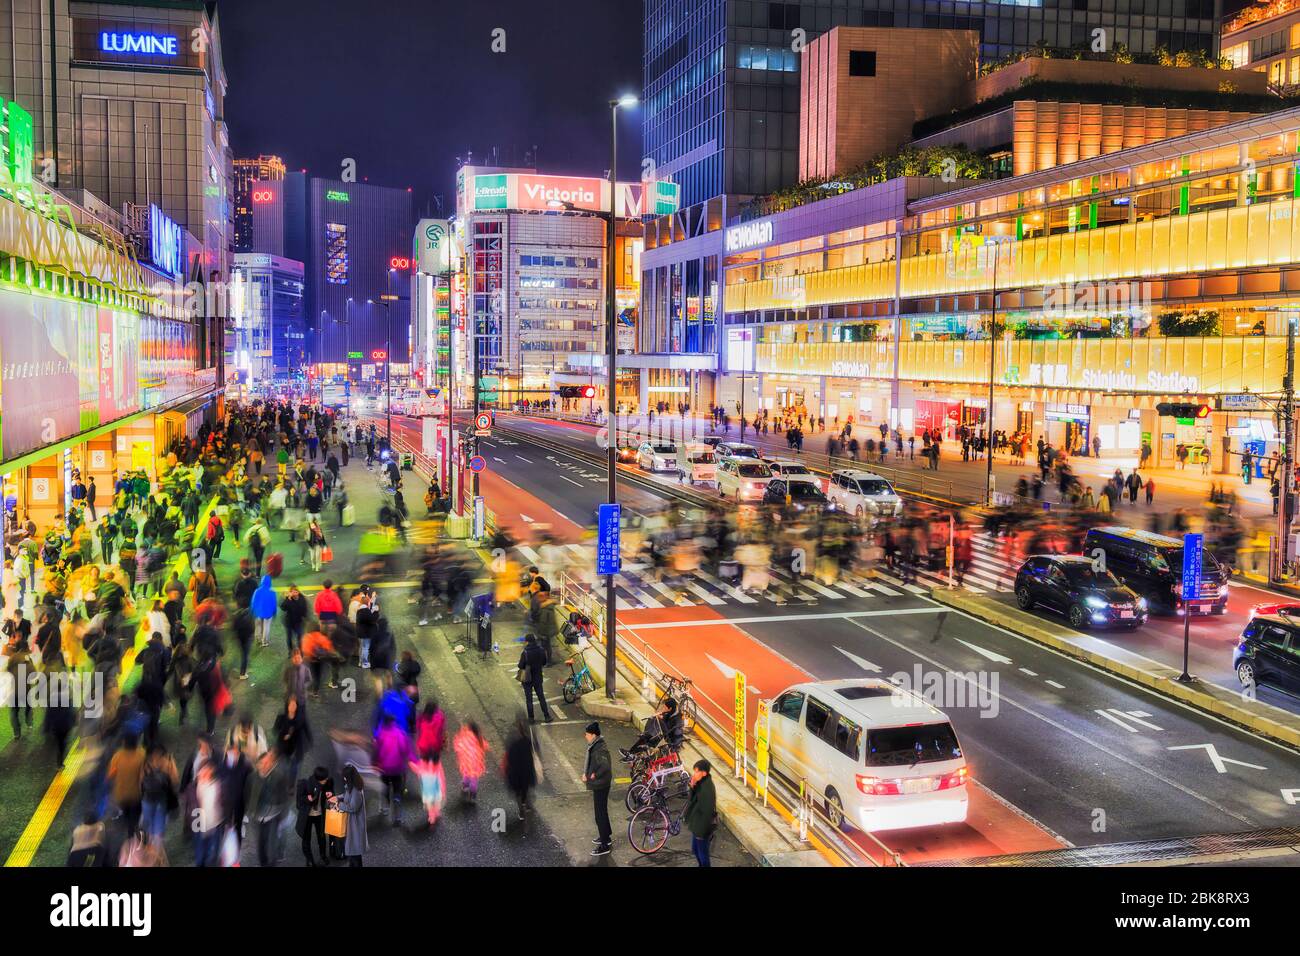 Tokyo, Japan - 31 Dec 2019: Busy street crossing near Shinjuku station in Toky at night with bright lights. Stock Photo